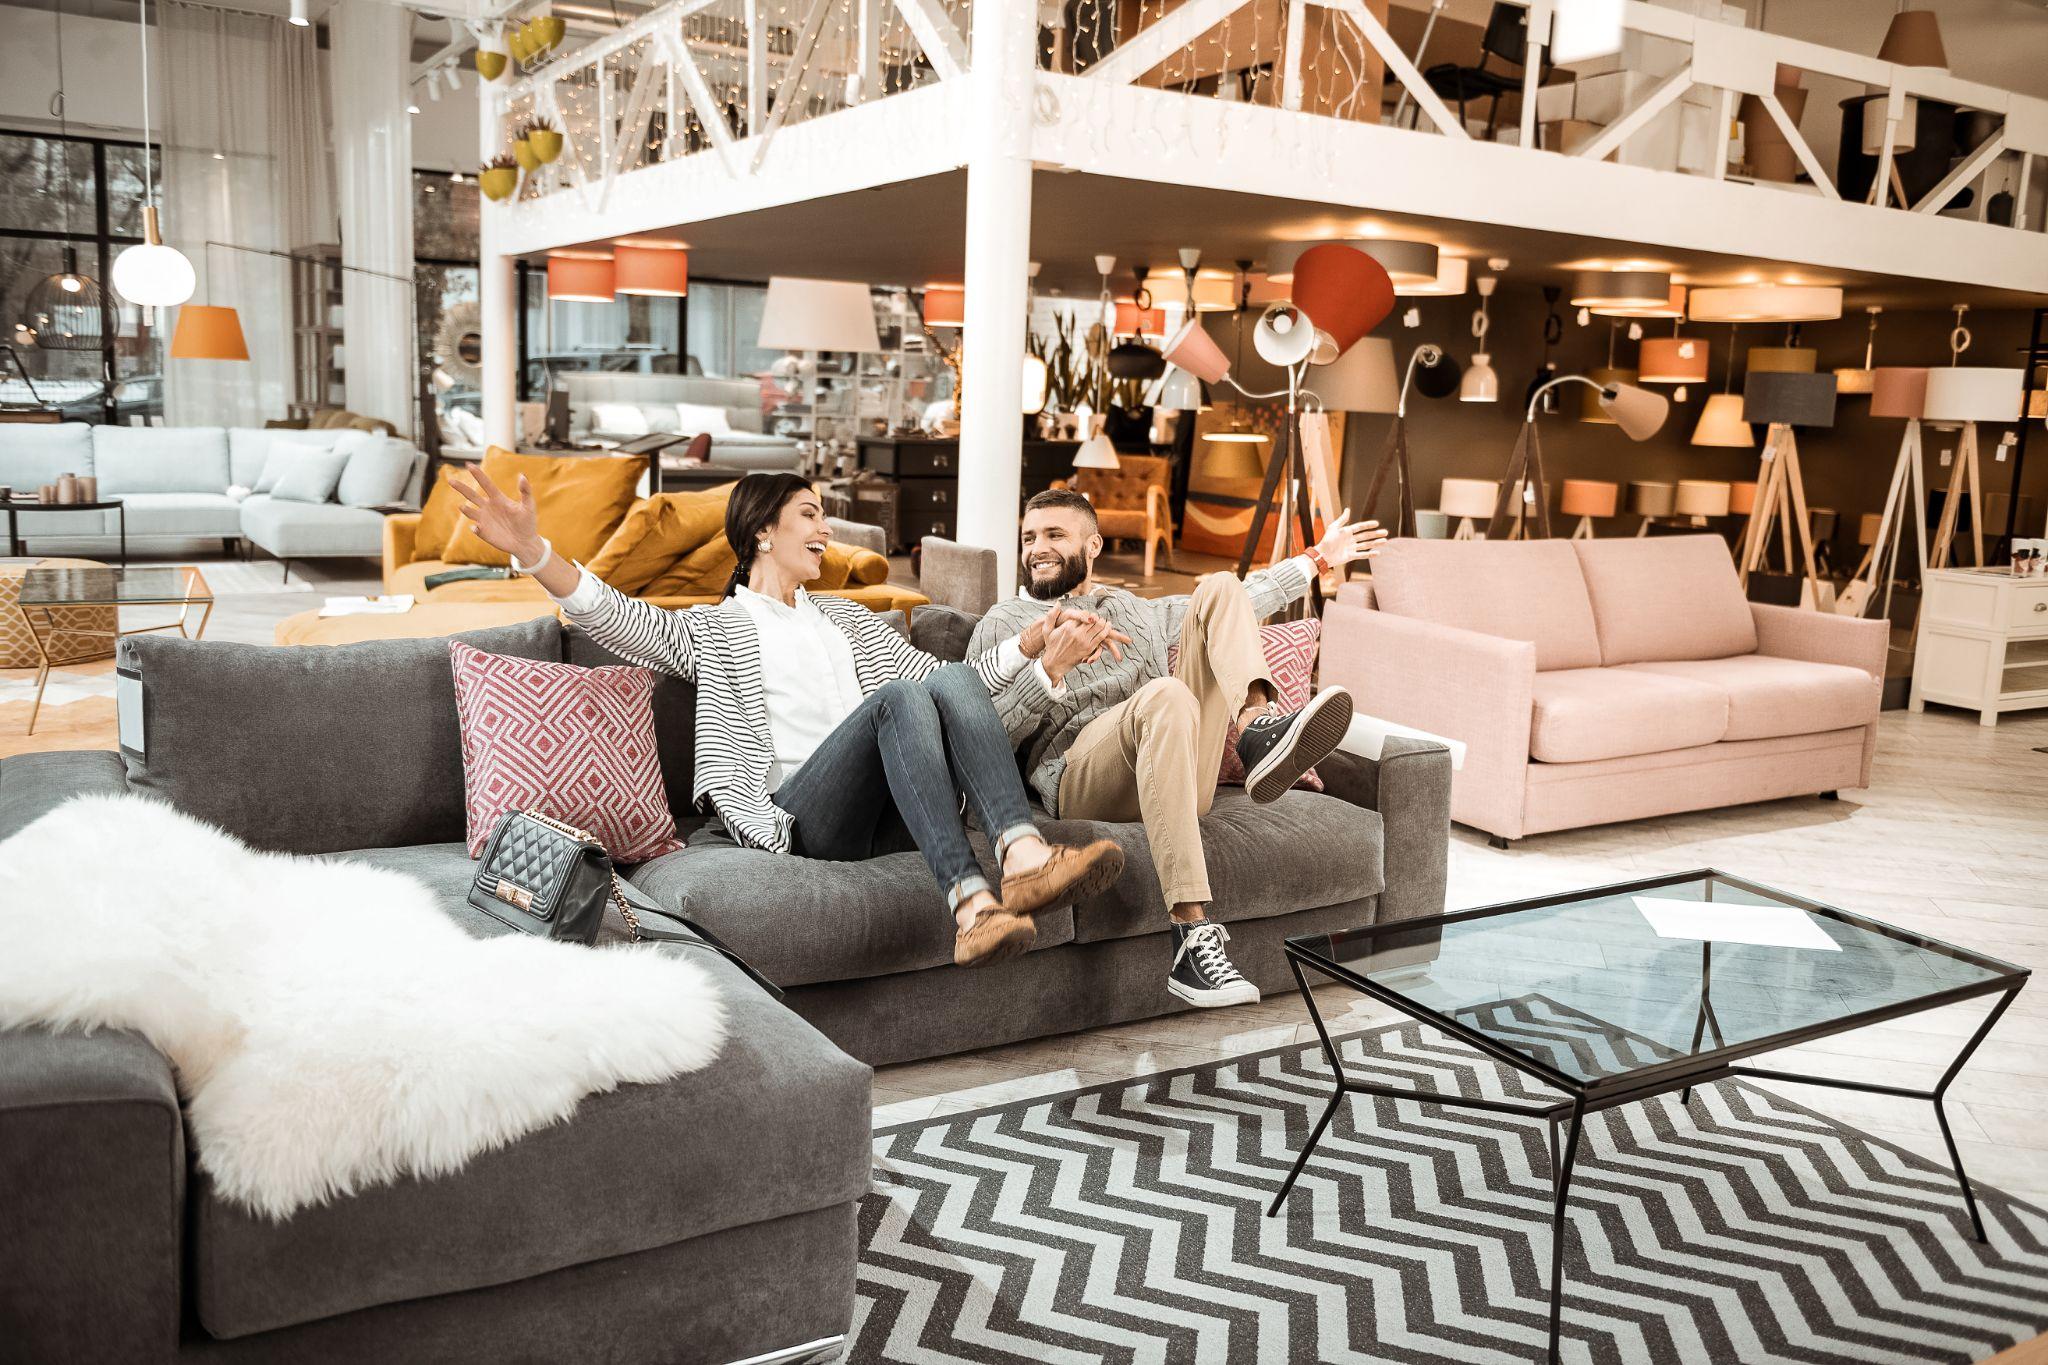 Cheerful laughing couple behaving childishly in furniture showroom while fooling around on grey couch